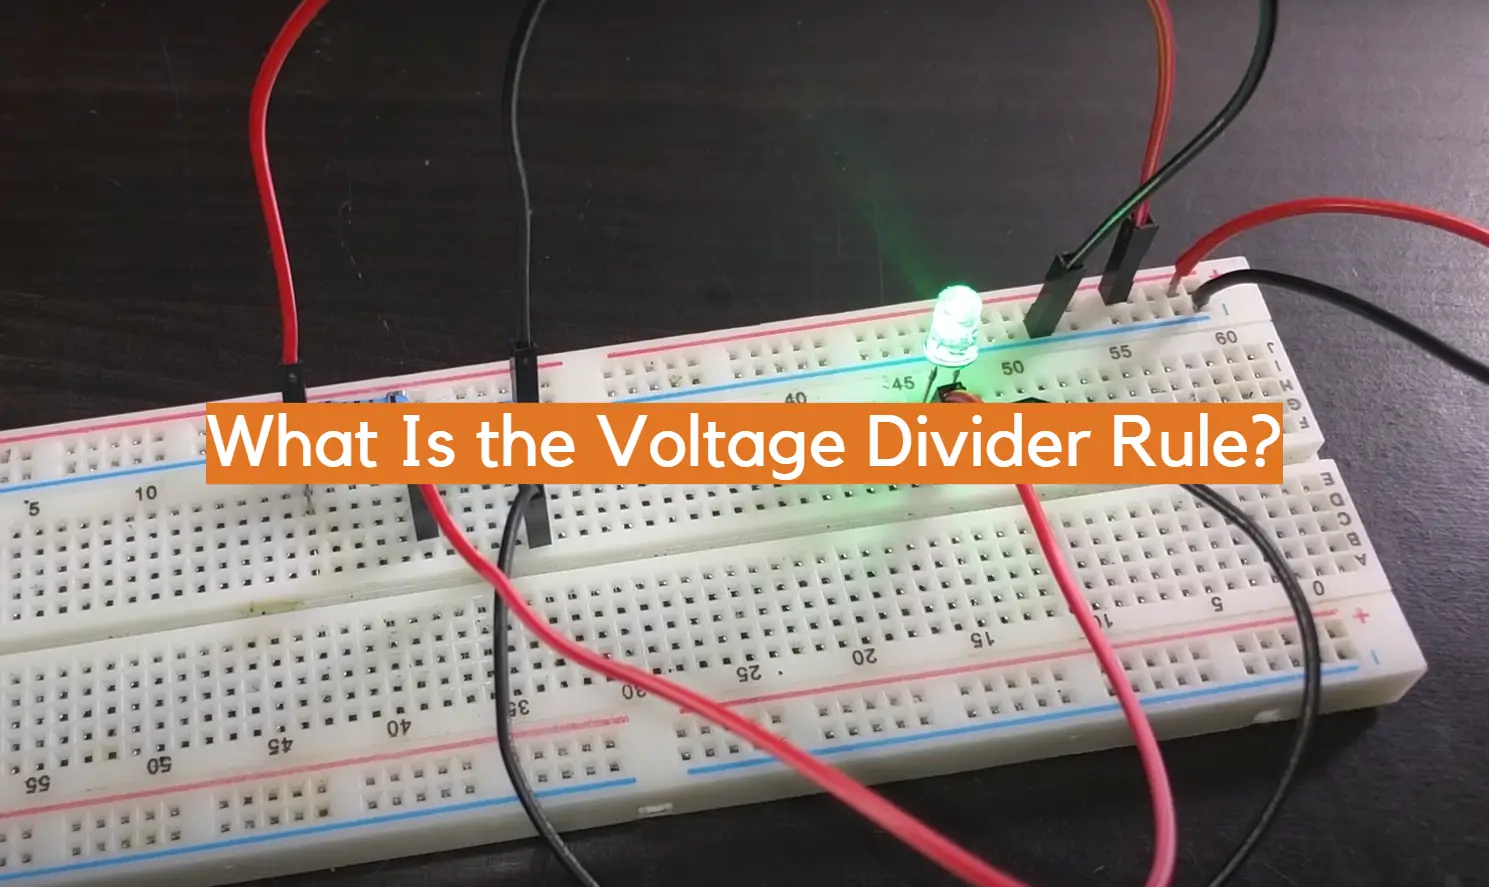 What Is the Voltage Divider Rule?